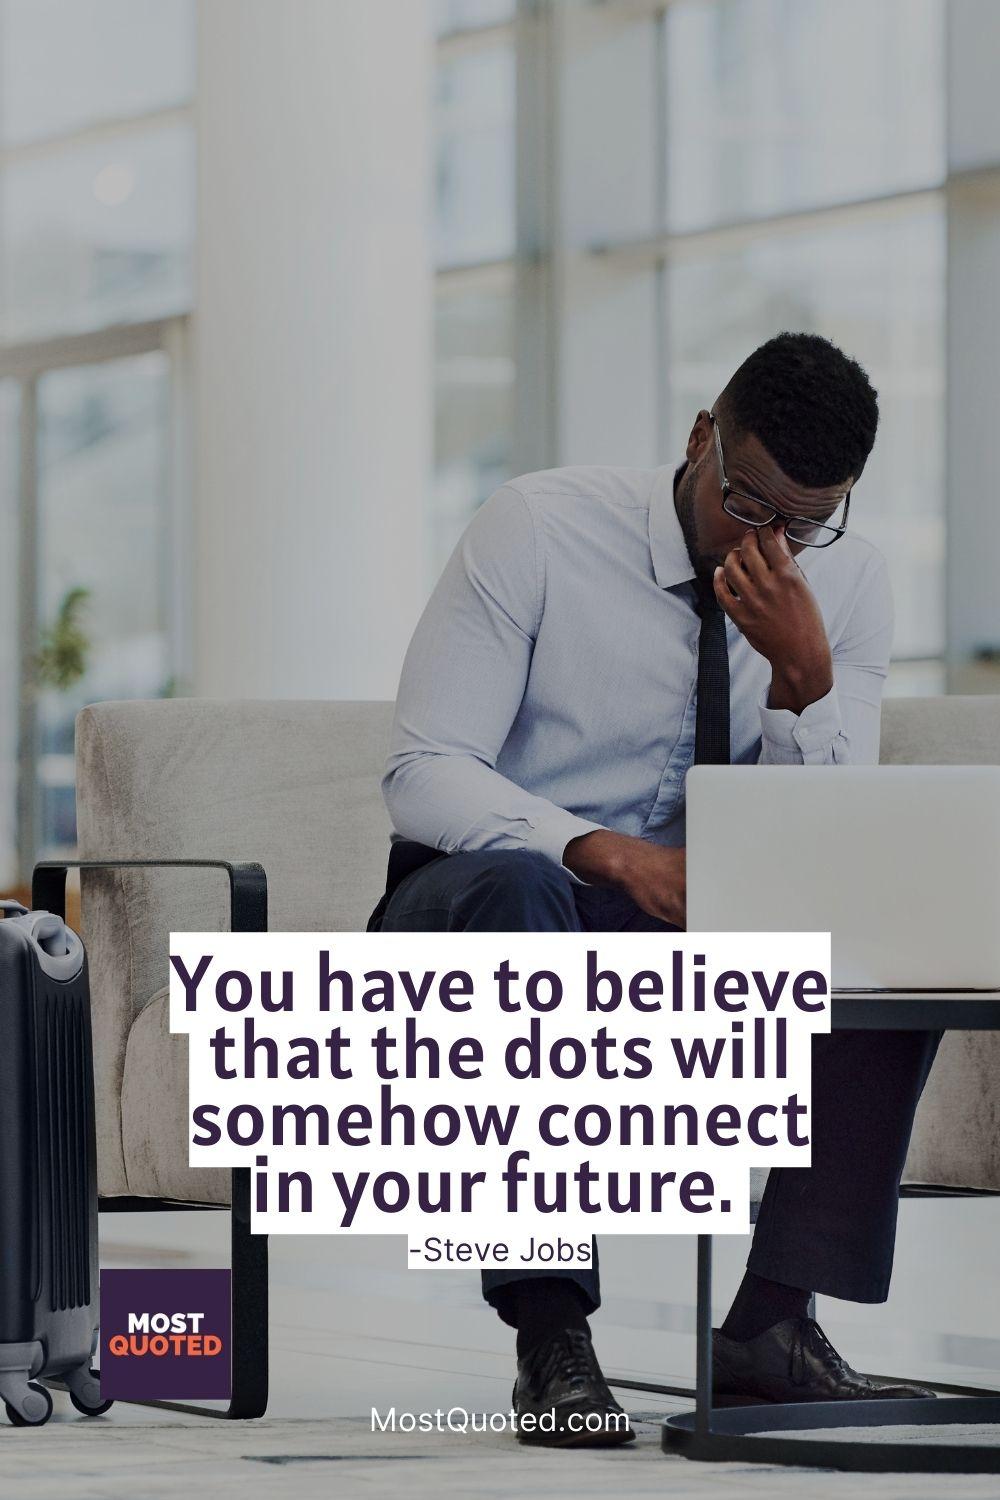 You have to believe that the dots will somehow connect in your future. - Steve Jobs